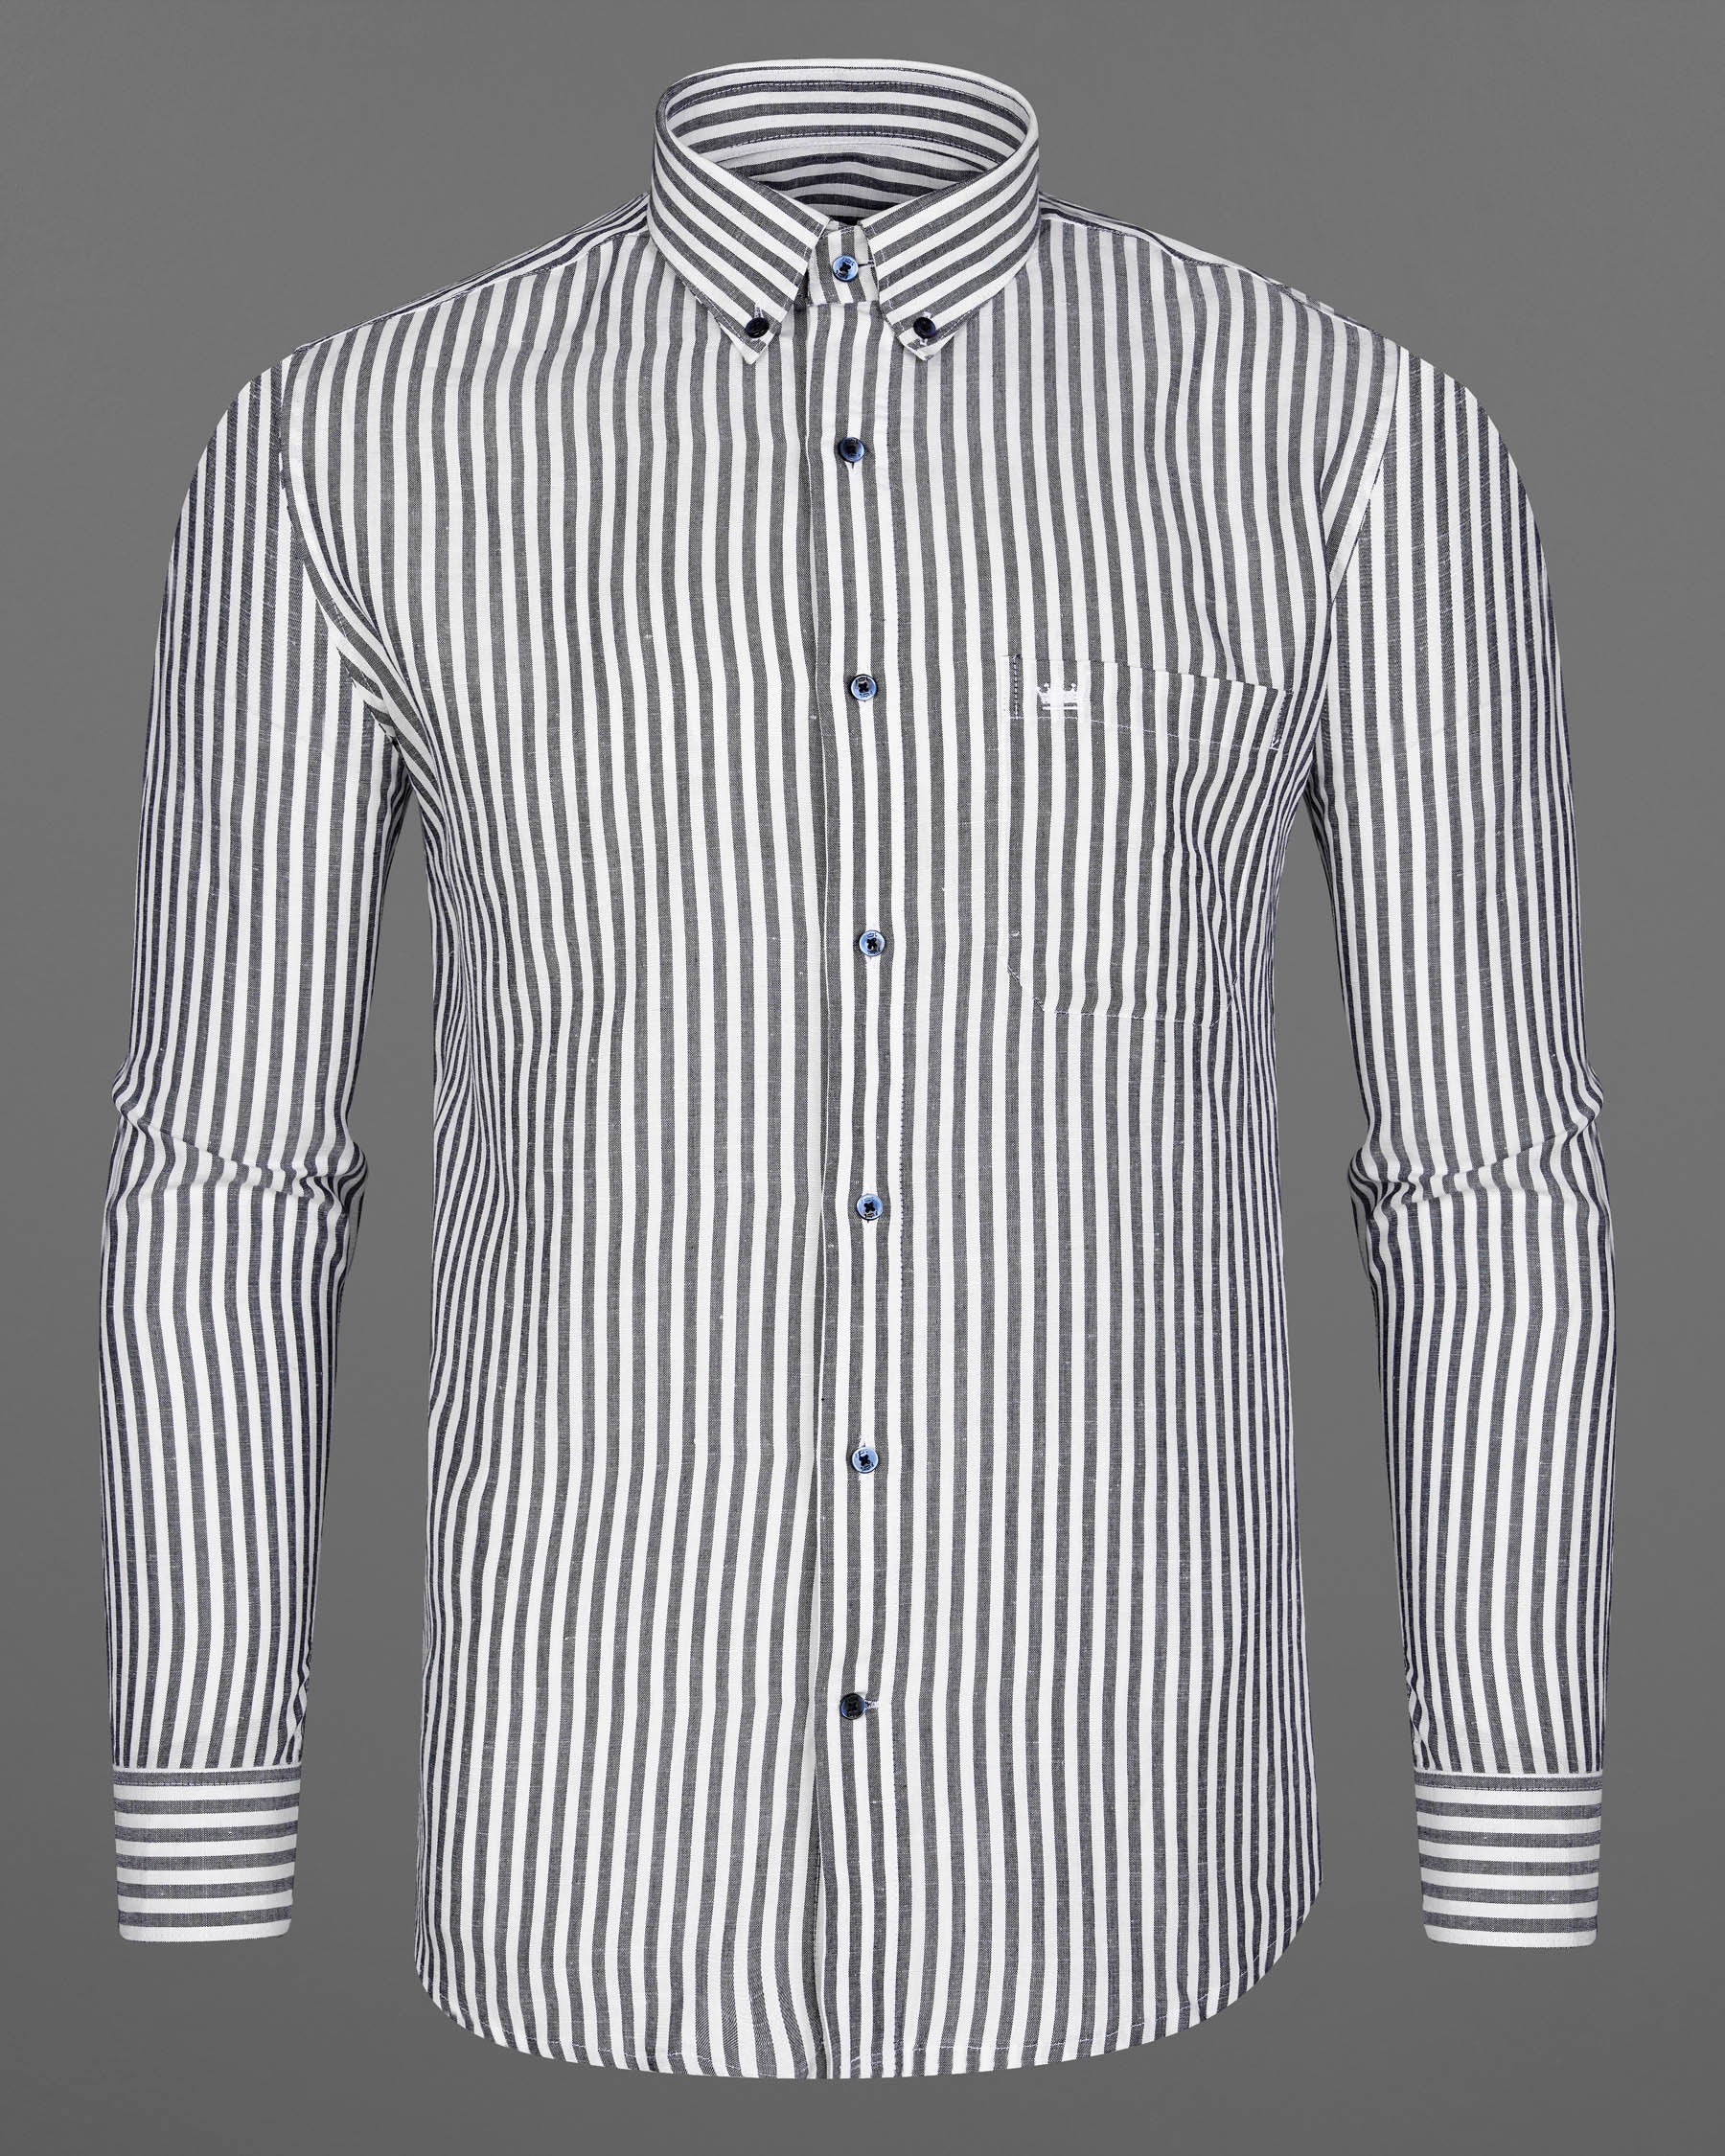 Bright White and Comet Gray Striped Luxurious Linen Shirt 7910-BD-BLE-38, 7910-BD-BLE-H-38, 7910-BD-BLE-39, 7910-BD-BLE-H-39, 7910-BD-BLE-40, 7910-BD-BLE-H-40, 7910-BD-BLE-42, 7910-BD-BLE-H-42, 7910-BD-BLE-44, 7910-BD-BLE-H-44, 7910-BD-BLE-46, 7910-BD-BLE-H-46, 7910-BD-BLE-48, 7910-BD-BLE-H-48, 7910-BD-BLE-50, 7910-BD-BLE-H-50, 7910-BD-BLE-52, 7910-BD-BLE-H-52